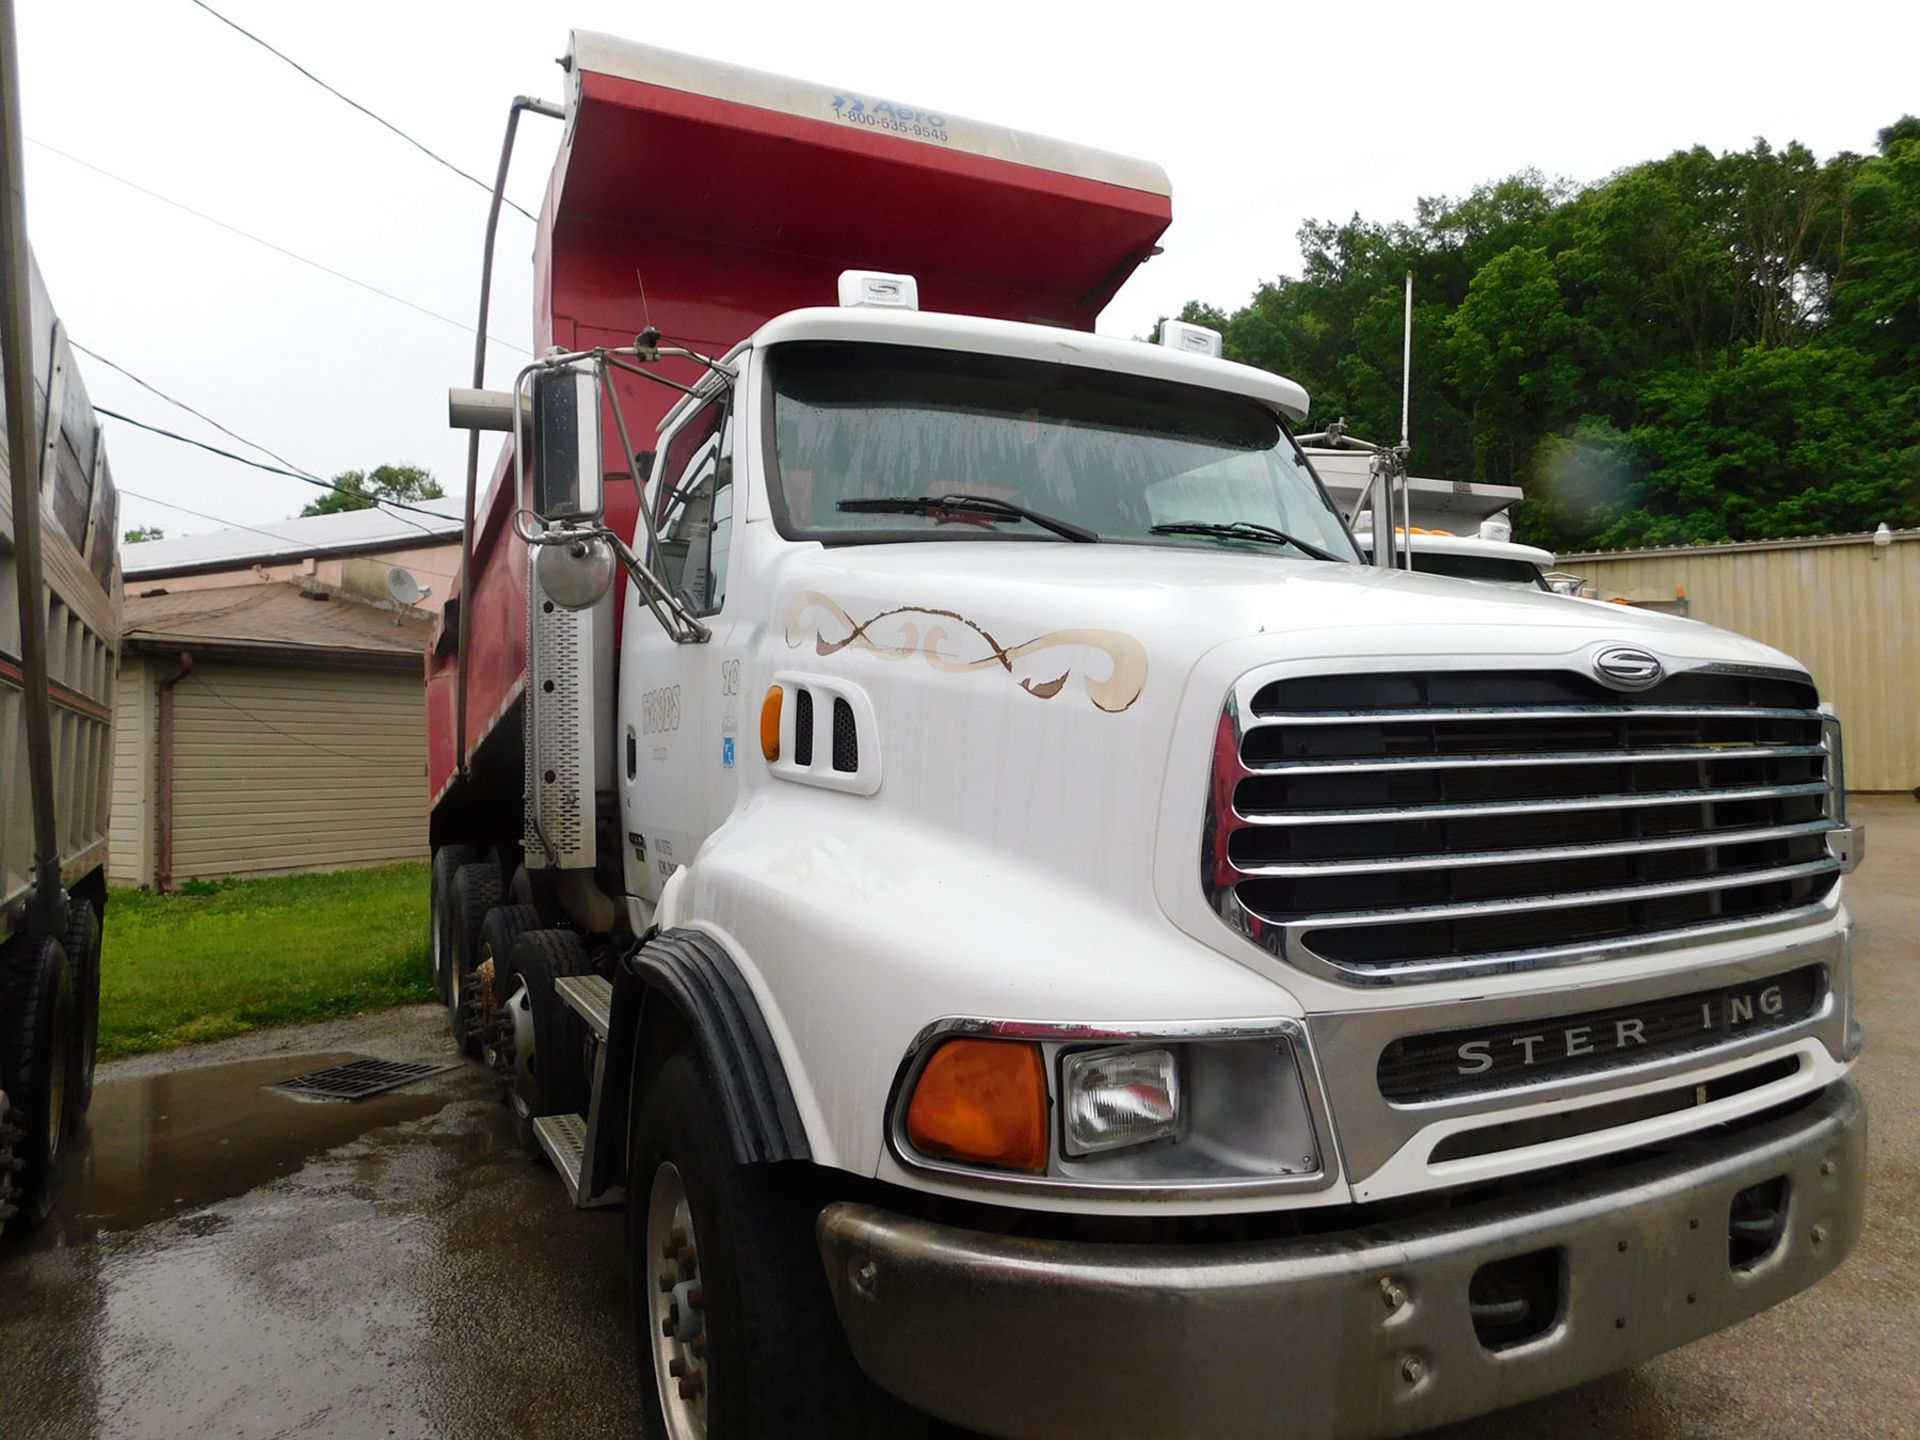 2006 STERLING DUMP TRUCK; MERCEDES BENZ 450-HP, ROADRANGER 8-SPEED TRANSMISSION WITH DEEP REDUCTION, - Image 3 of 7